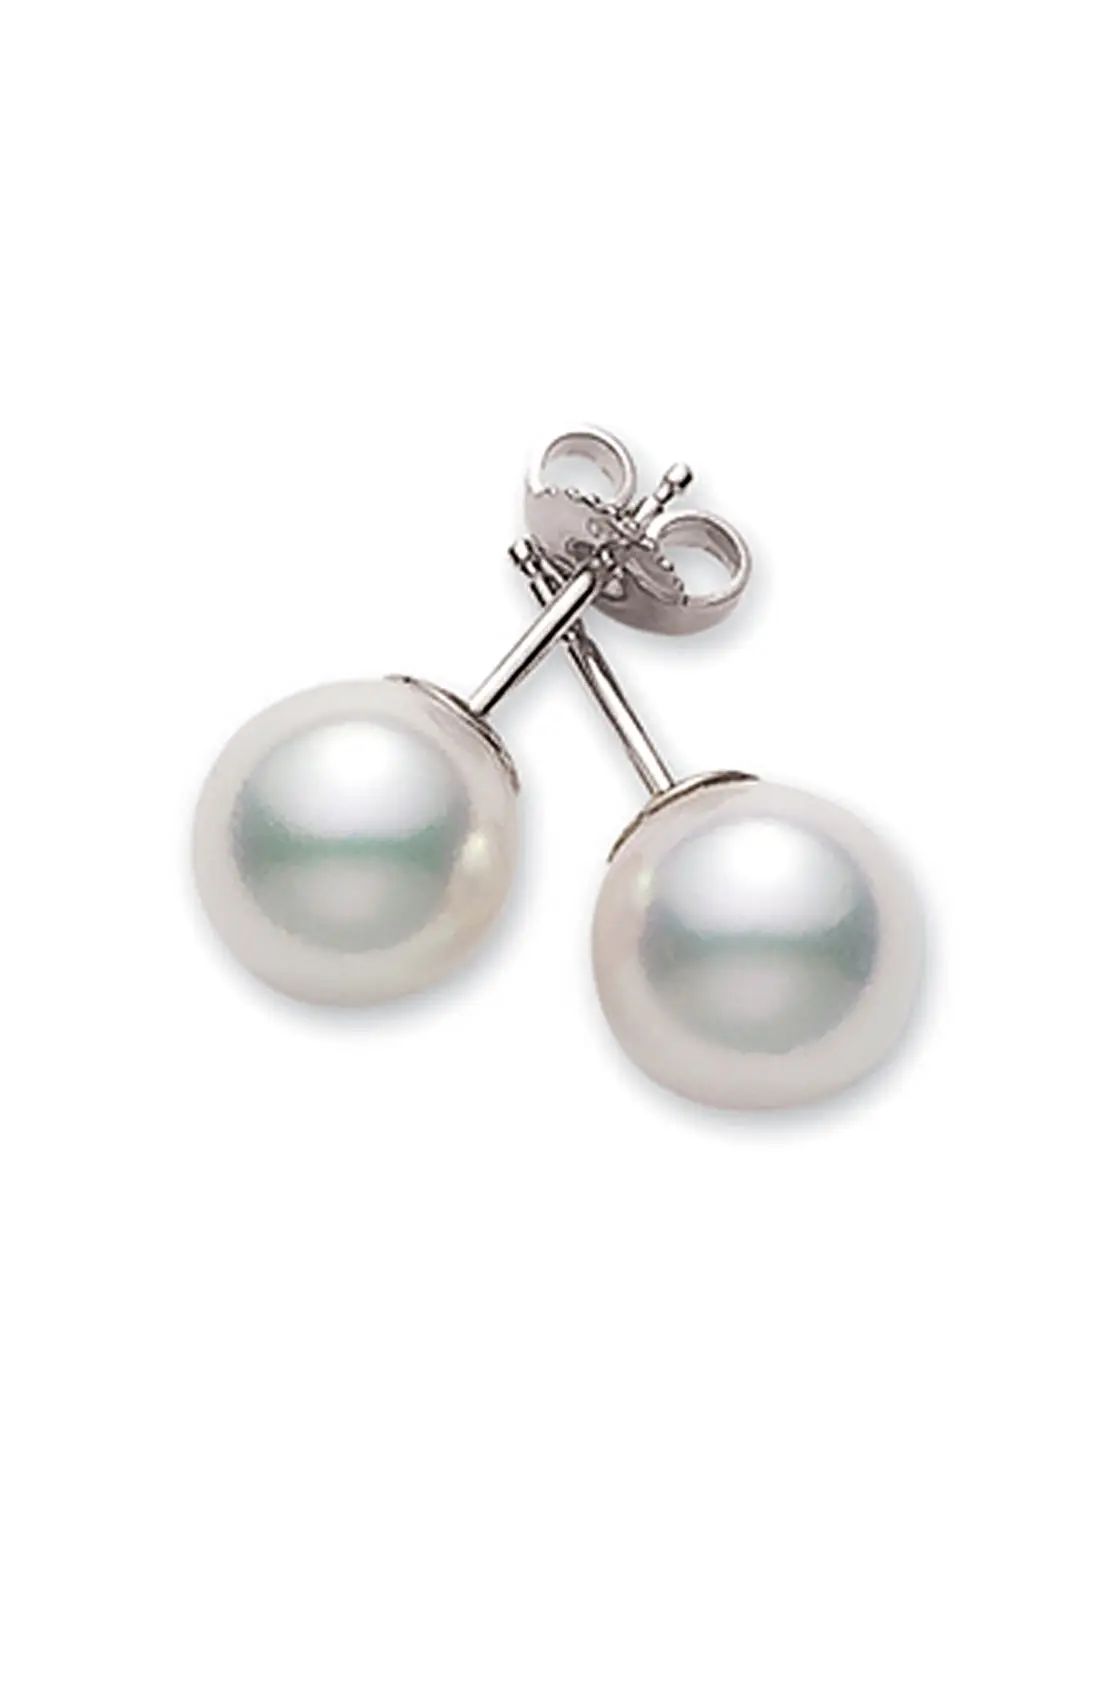 Mikimoto Akoya Pearl Stud Earrings, Size 7.5-8 Mm at Nordstrom | Nordstrom